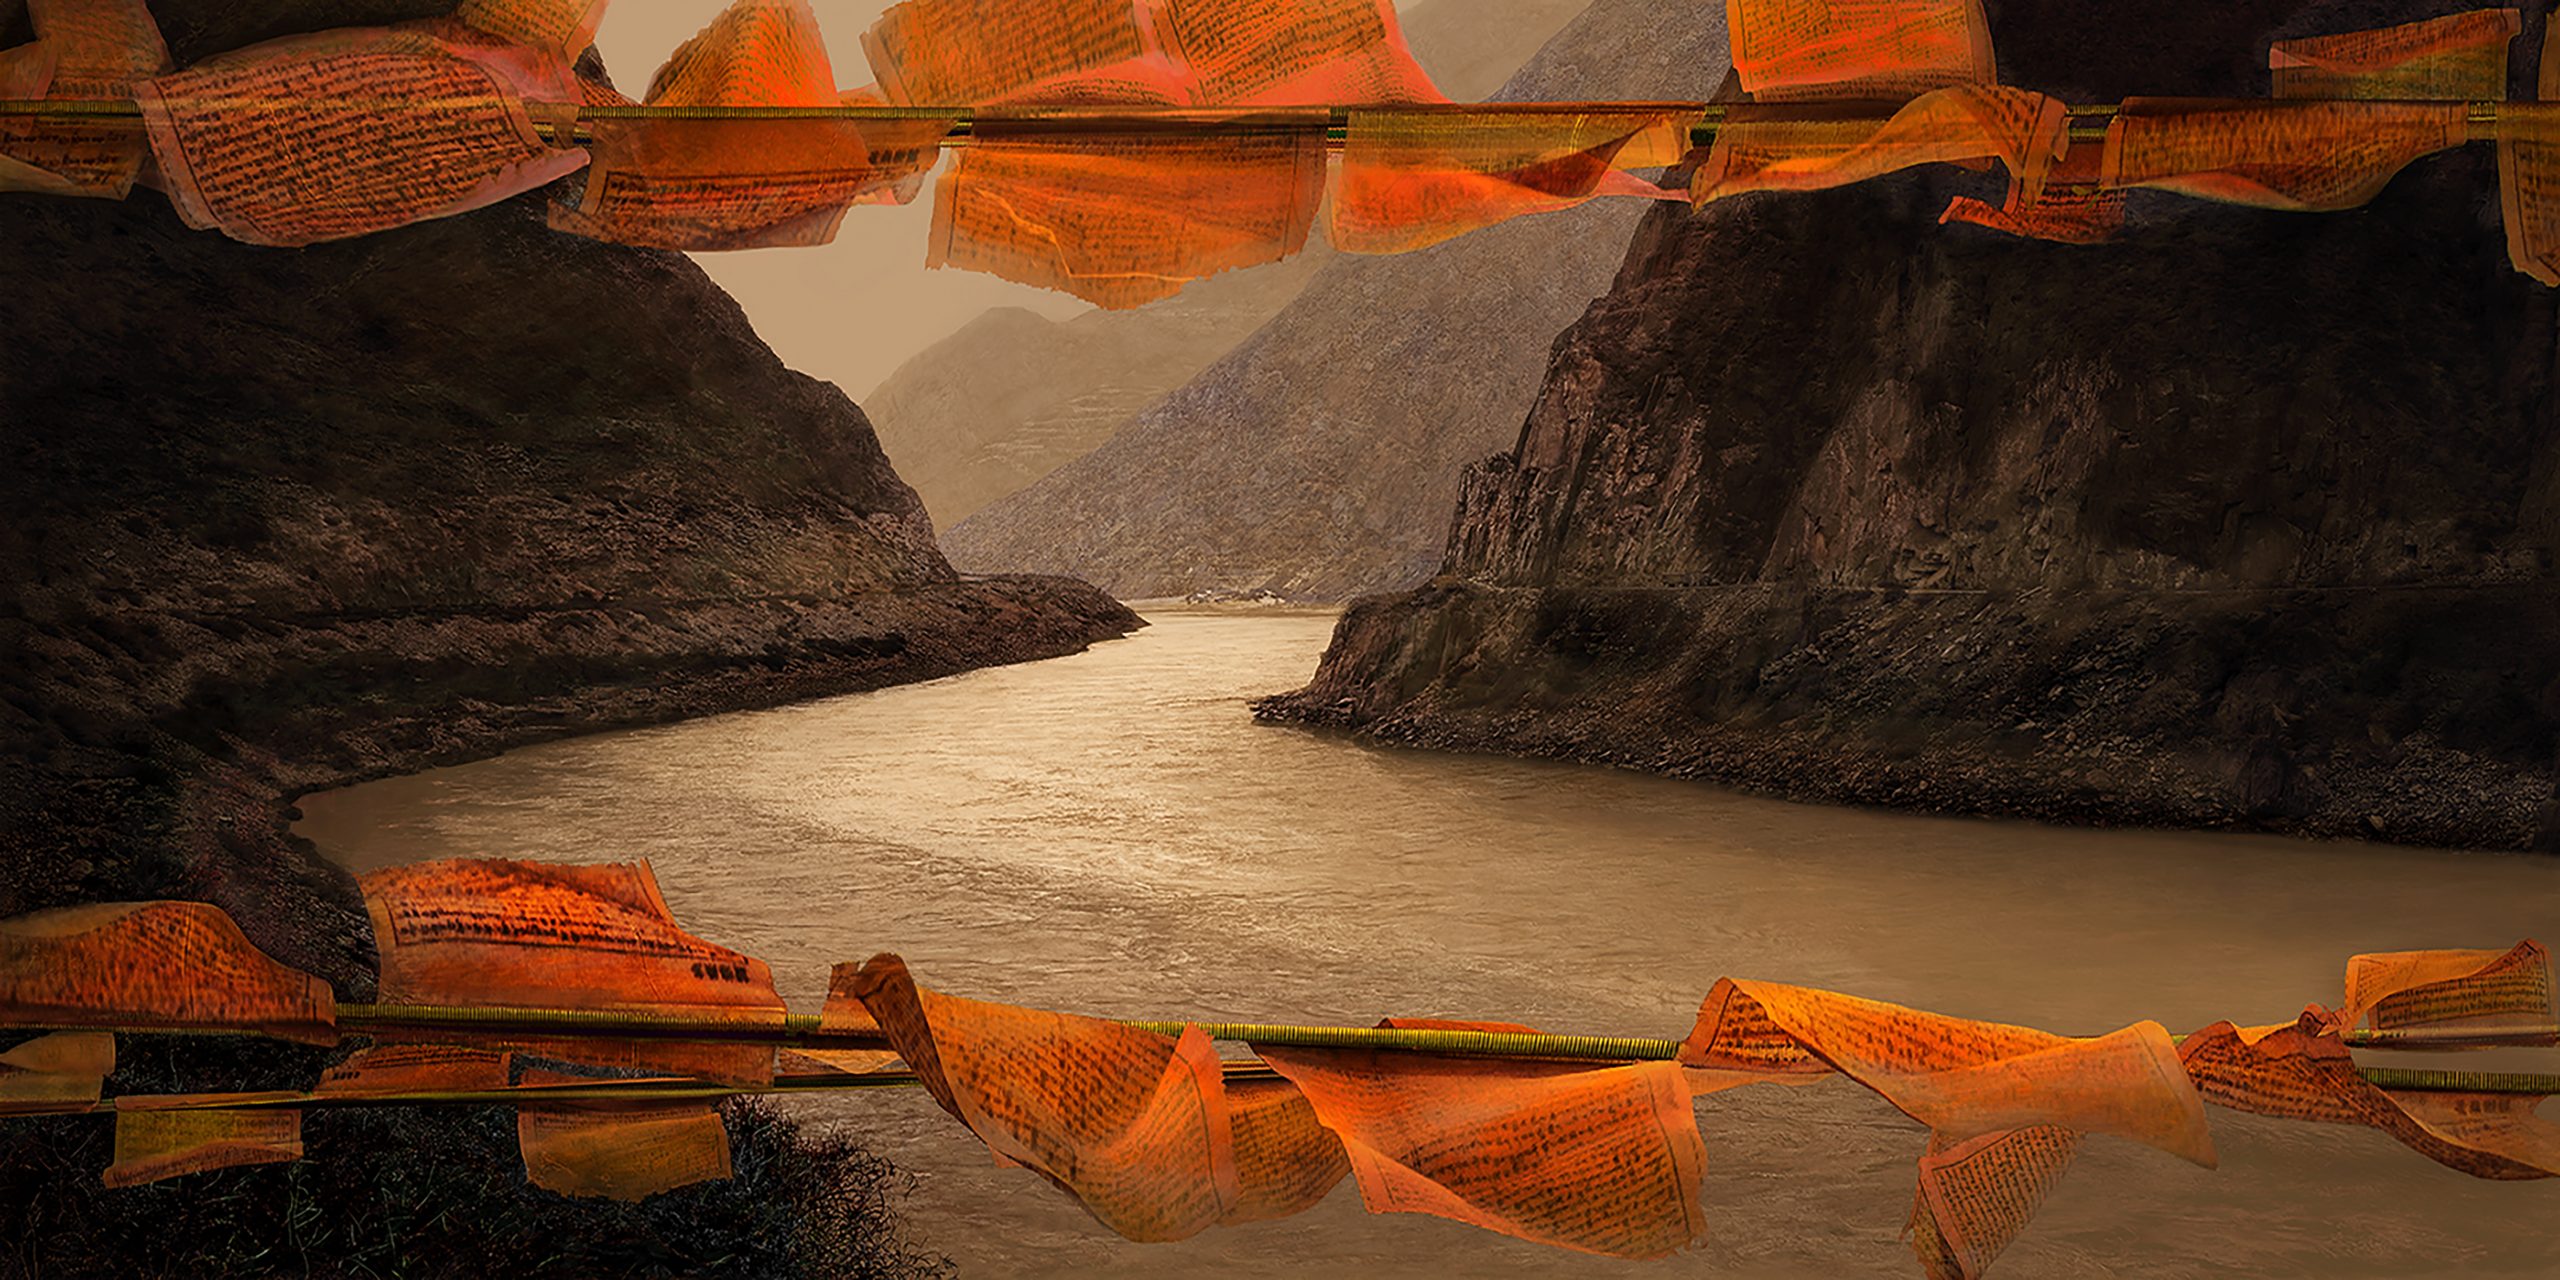 ©Irene Kung. Yangtse Flags / Will the wind carry our prayers or Fire on the Yangtse, 2021 D-print on rag paper Edition of 8 200 x 100 cm